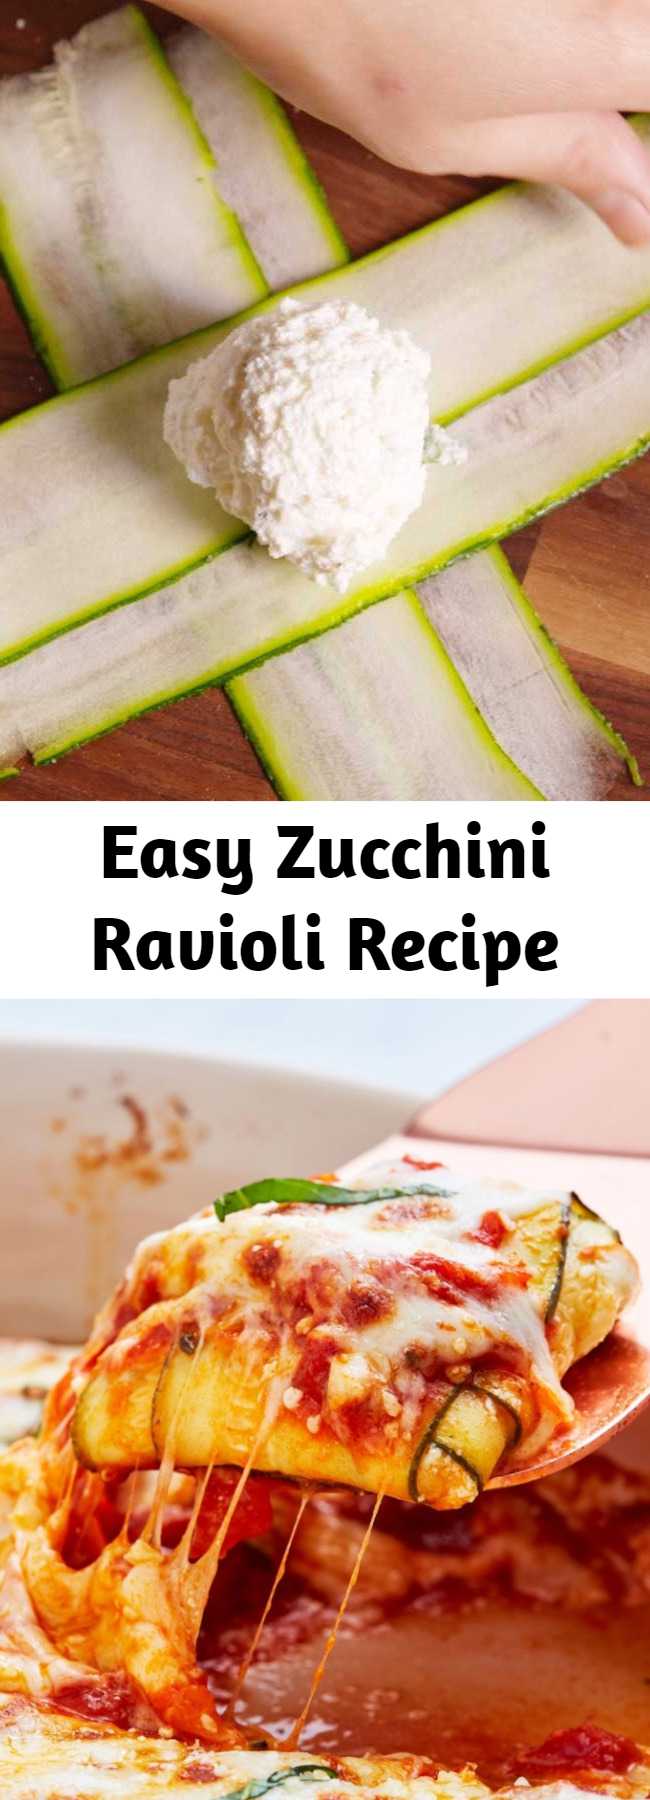 Easy Zucchini Ravioli Recipe - Zucchini noodles can stand in for much more than spaghetti. #easy #recipe #zucchini #ravioli #vegetarian #vegetable #healthy #dinner #filling #lowcarb